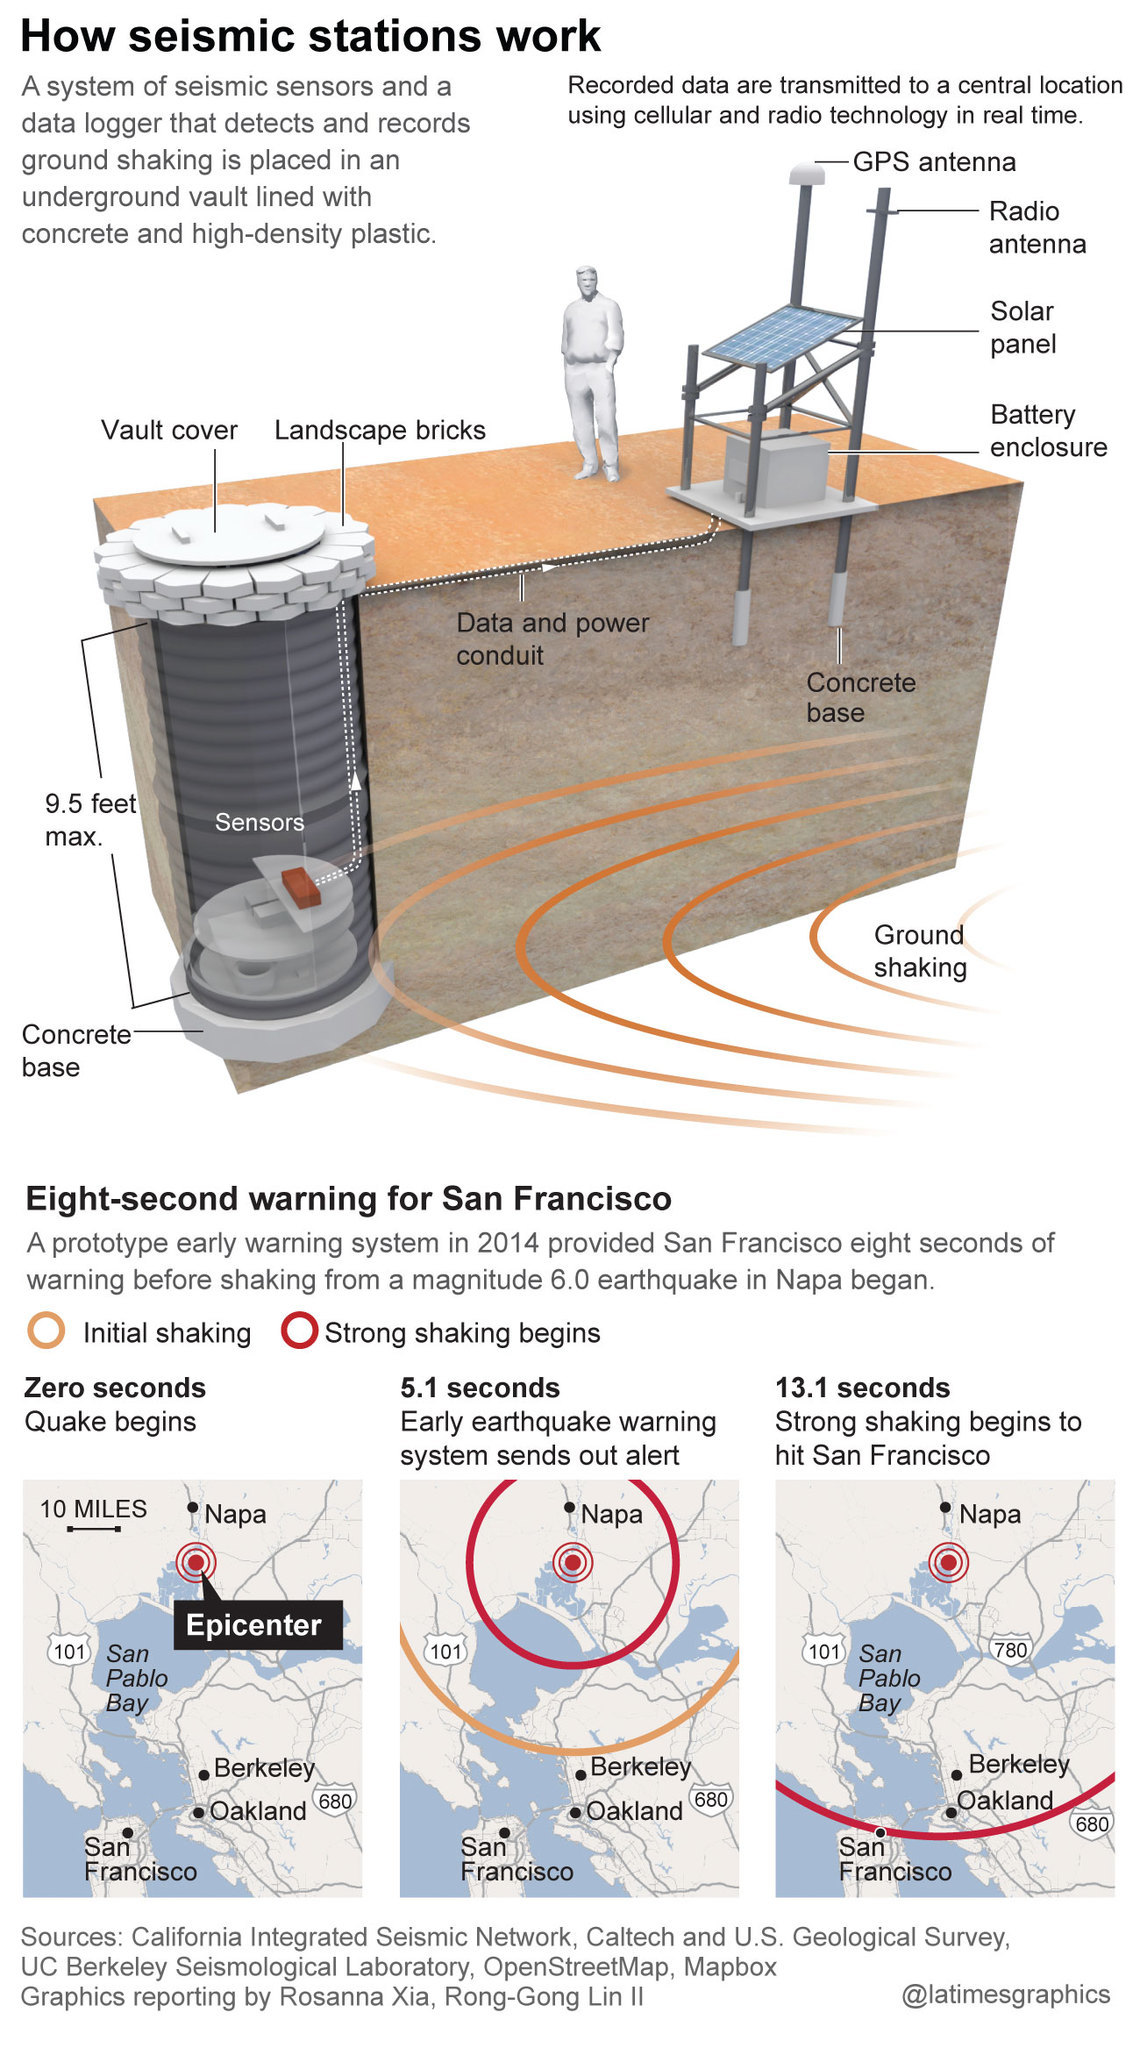 ‘Millions of lives at stake’ if California can’t save earthquake alert system ...